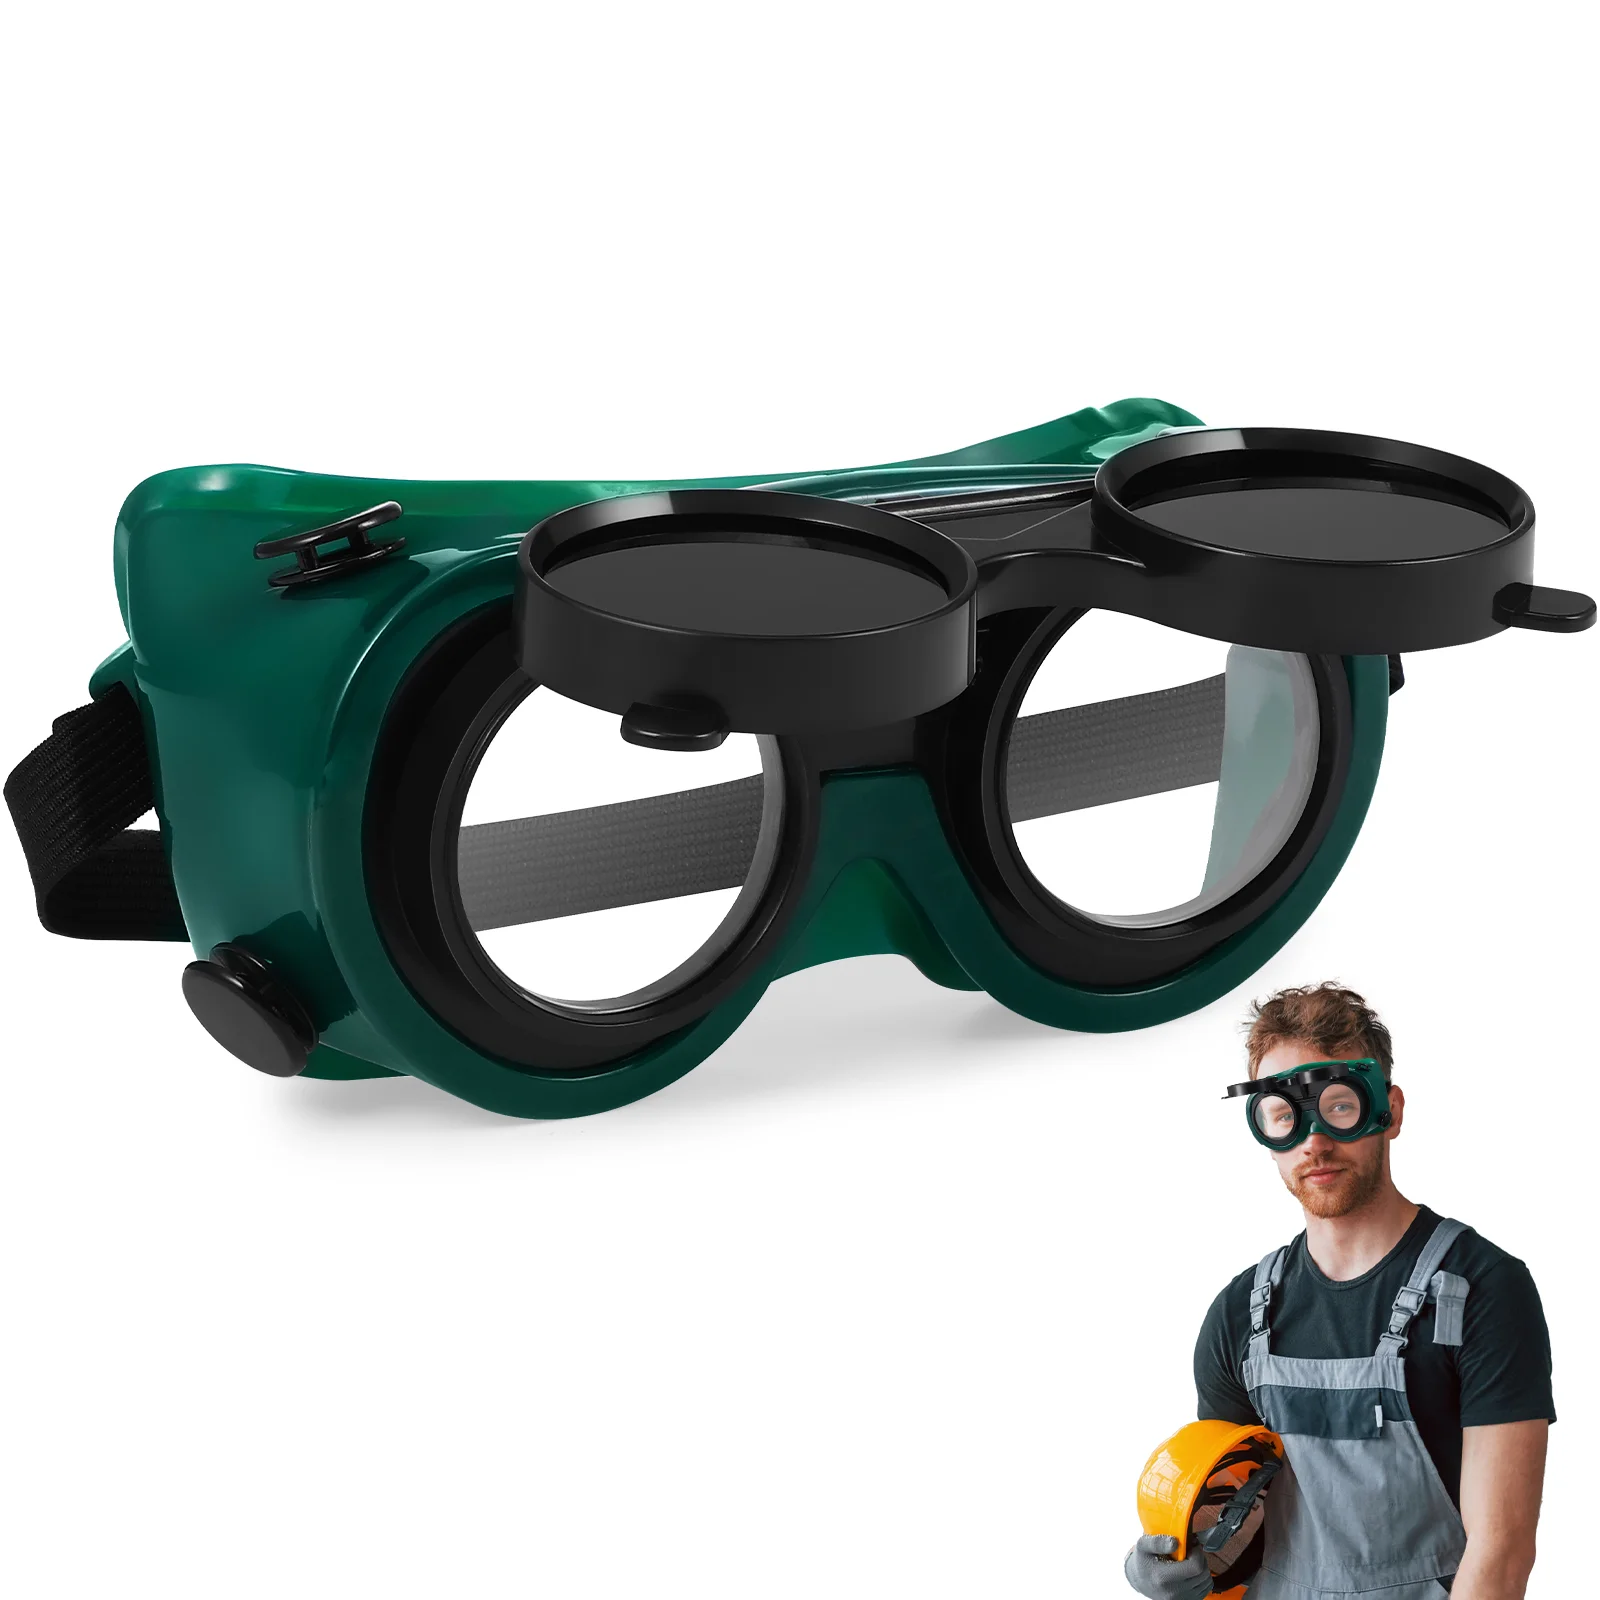 Anti-Glare Protective Welding Goggles With Flip Up Safety Protective Grinding Glasses Eclipse Spectacles Weld Accessories laser safety glasses for blue violet green lasers 190nm 540nm 405nm 450nm 515nm 520nm 532nm laser protective goggles with box